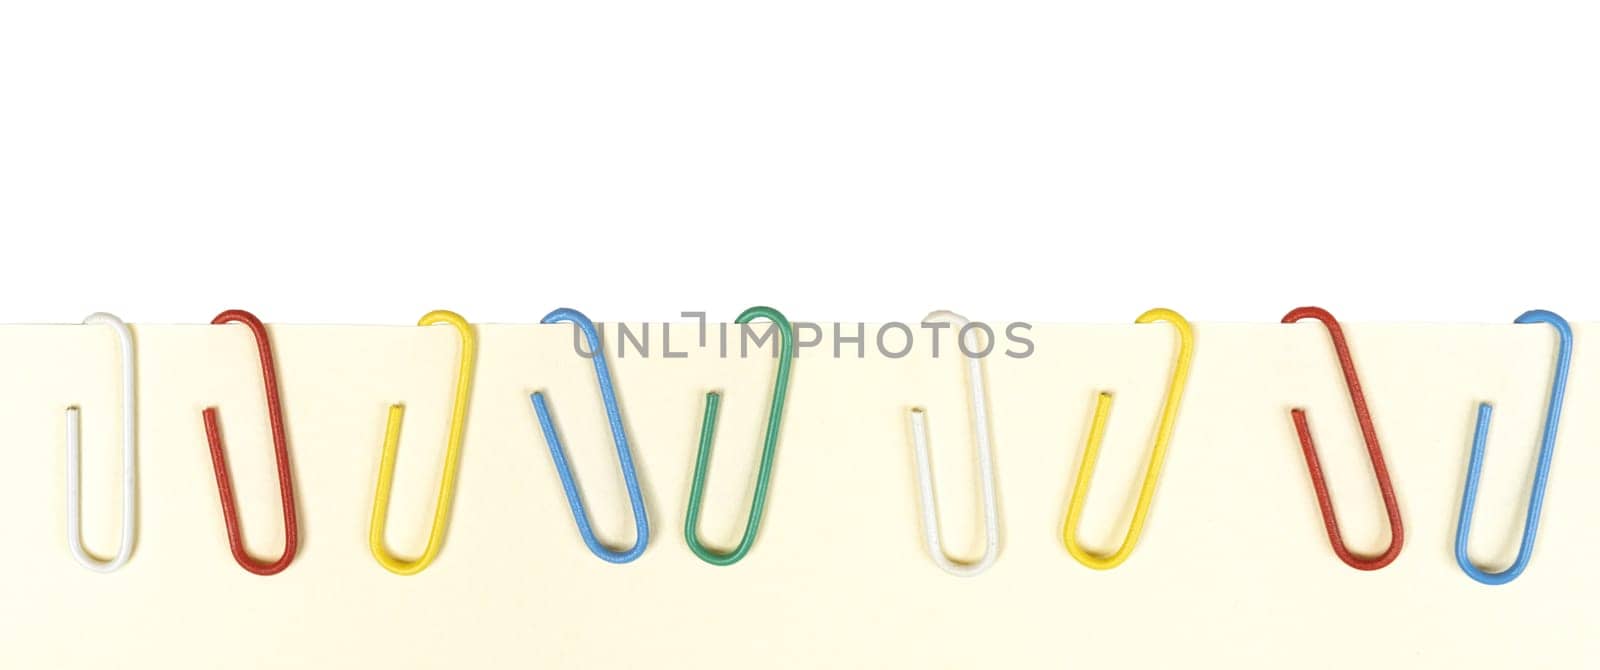 a row of colored paper clips by sergiodv